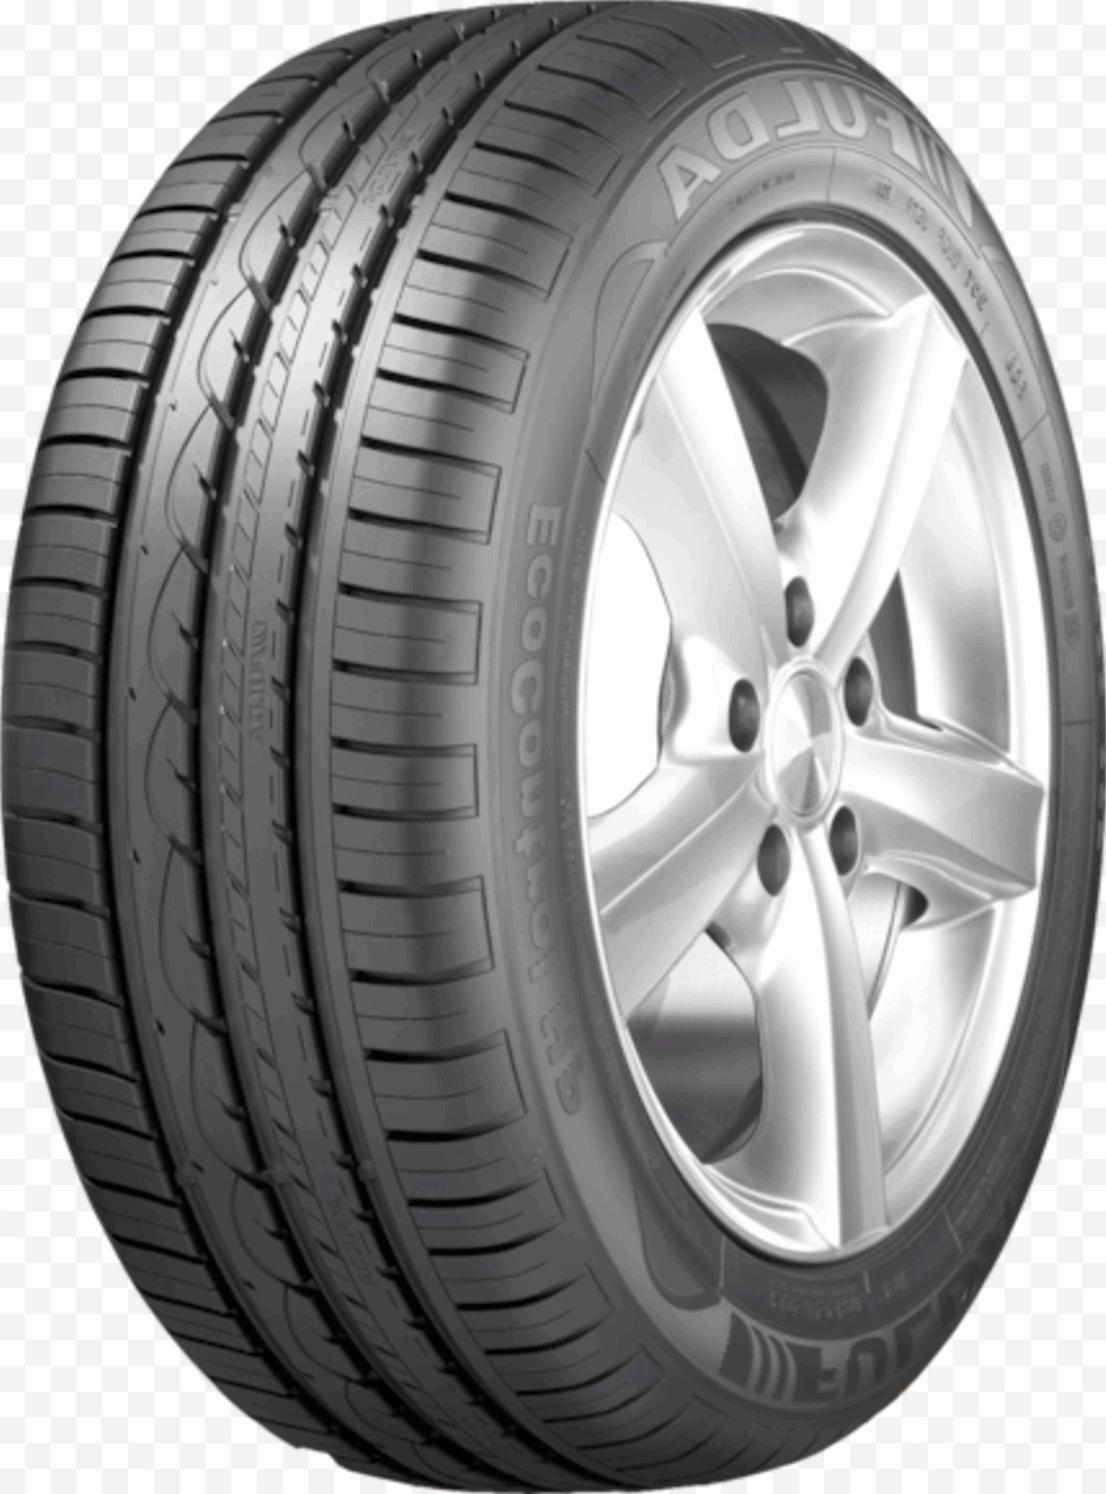 Fulda EcoControl - Tyre Reviews and Tests